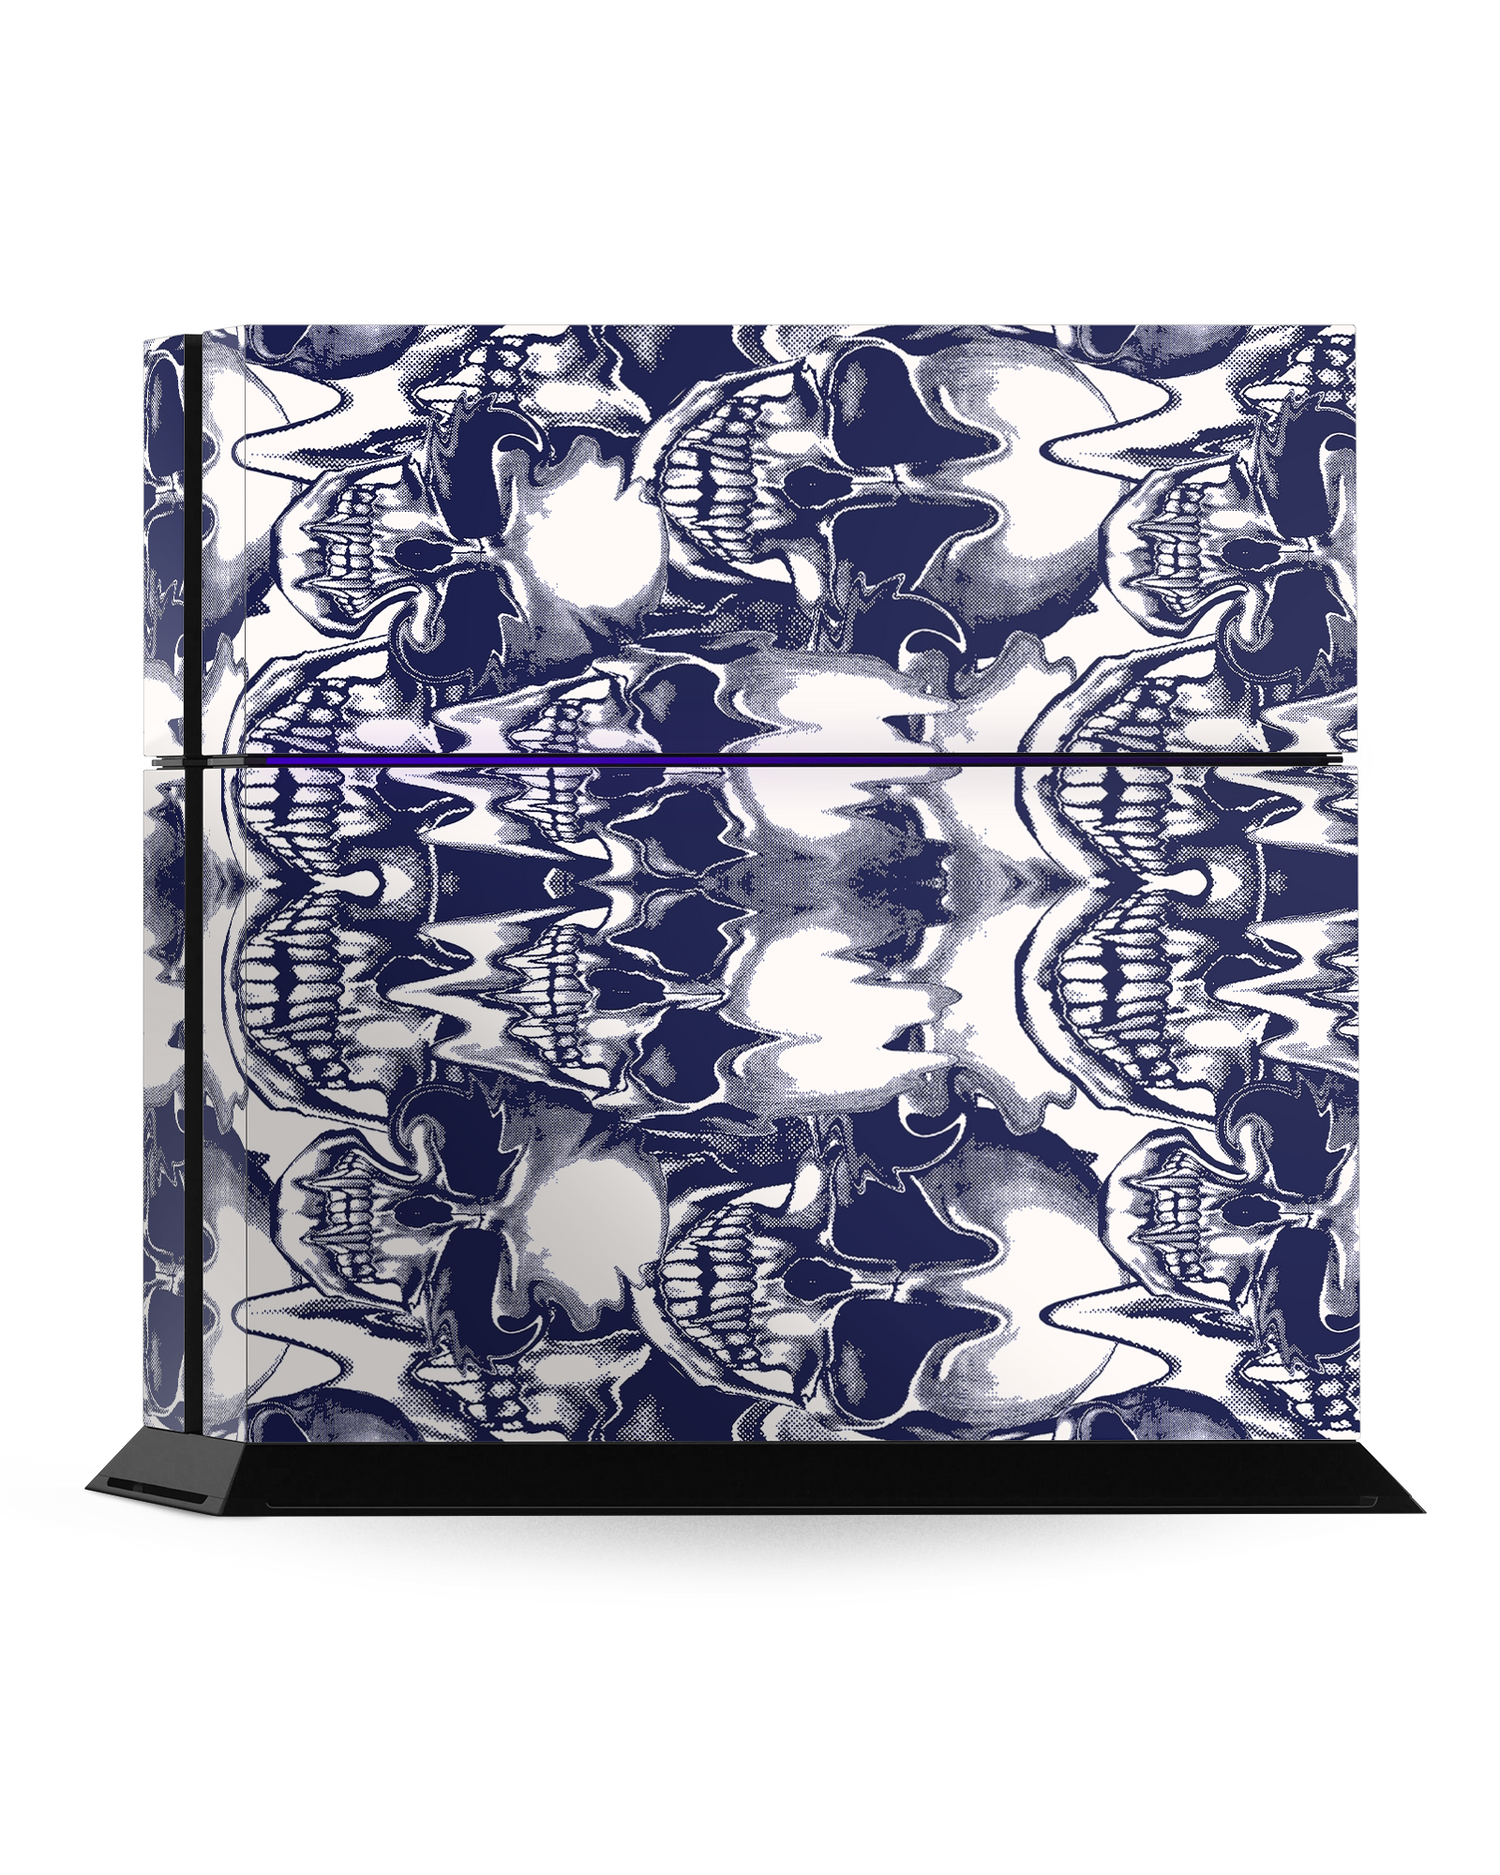 Warped Skulls Console Skin for Sony PlayStation 4: Standing